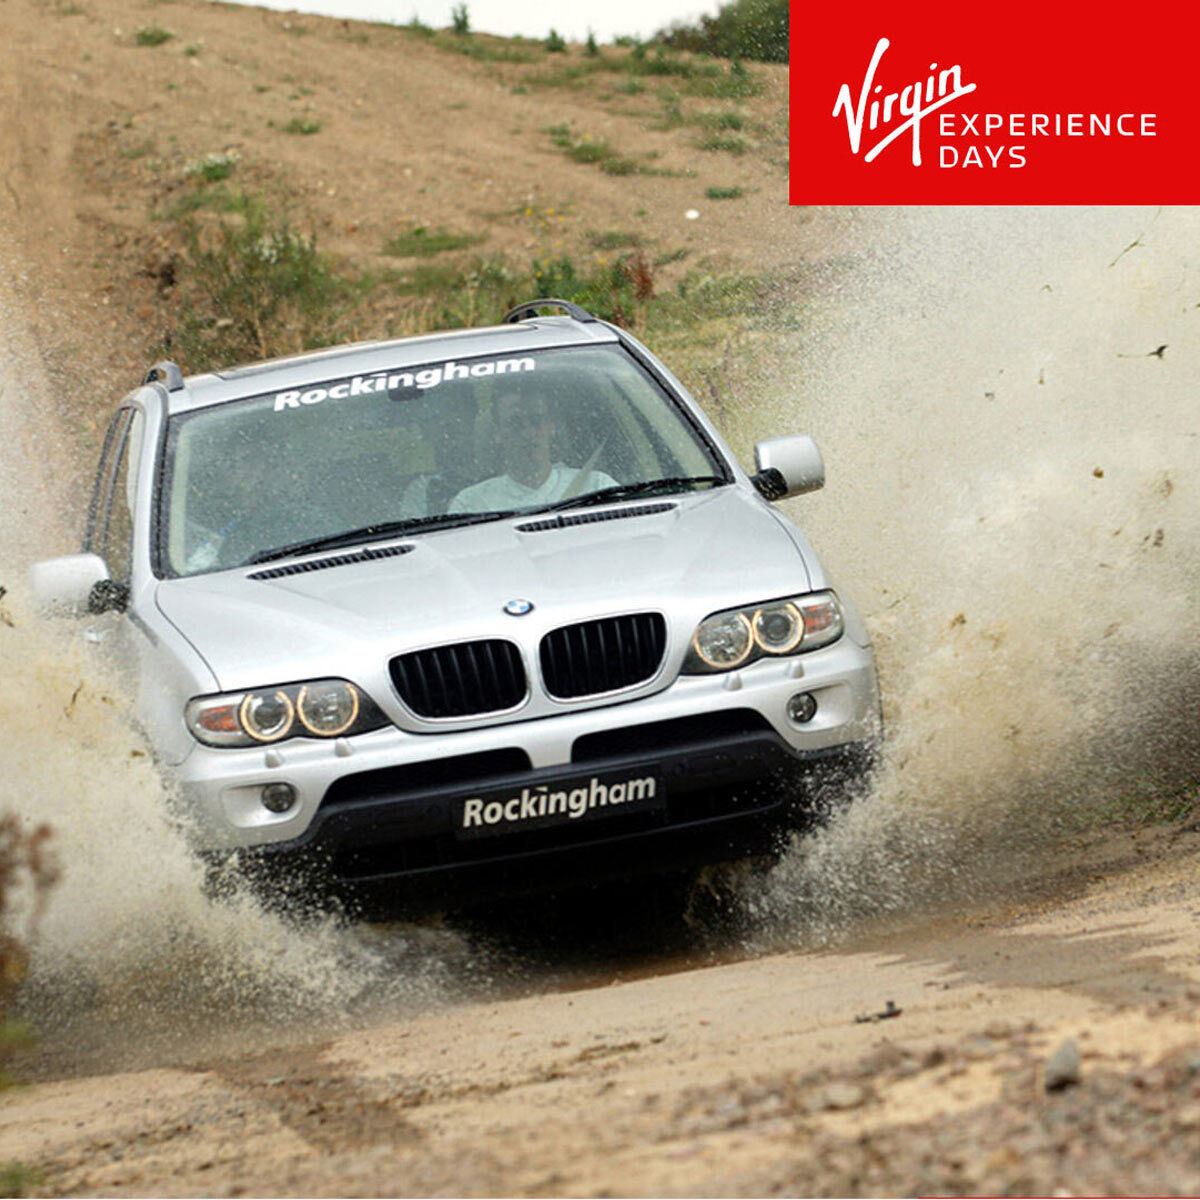 Buy Virgin Experience Introductory Off Road Driving Image1 at Costco.co.uk